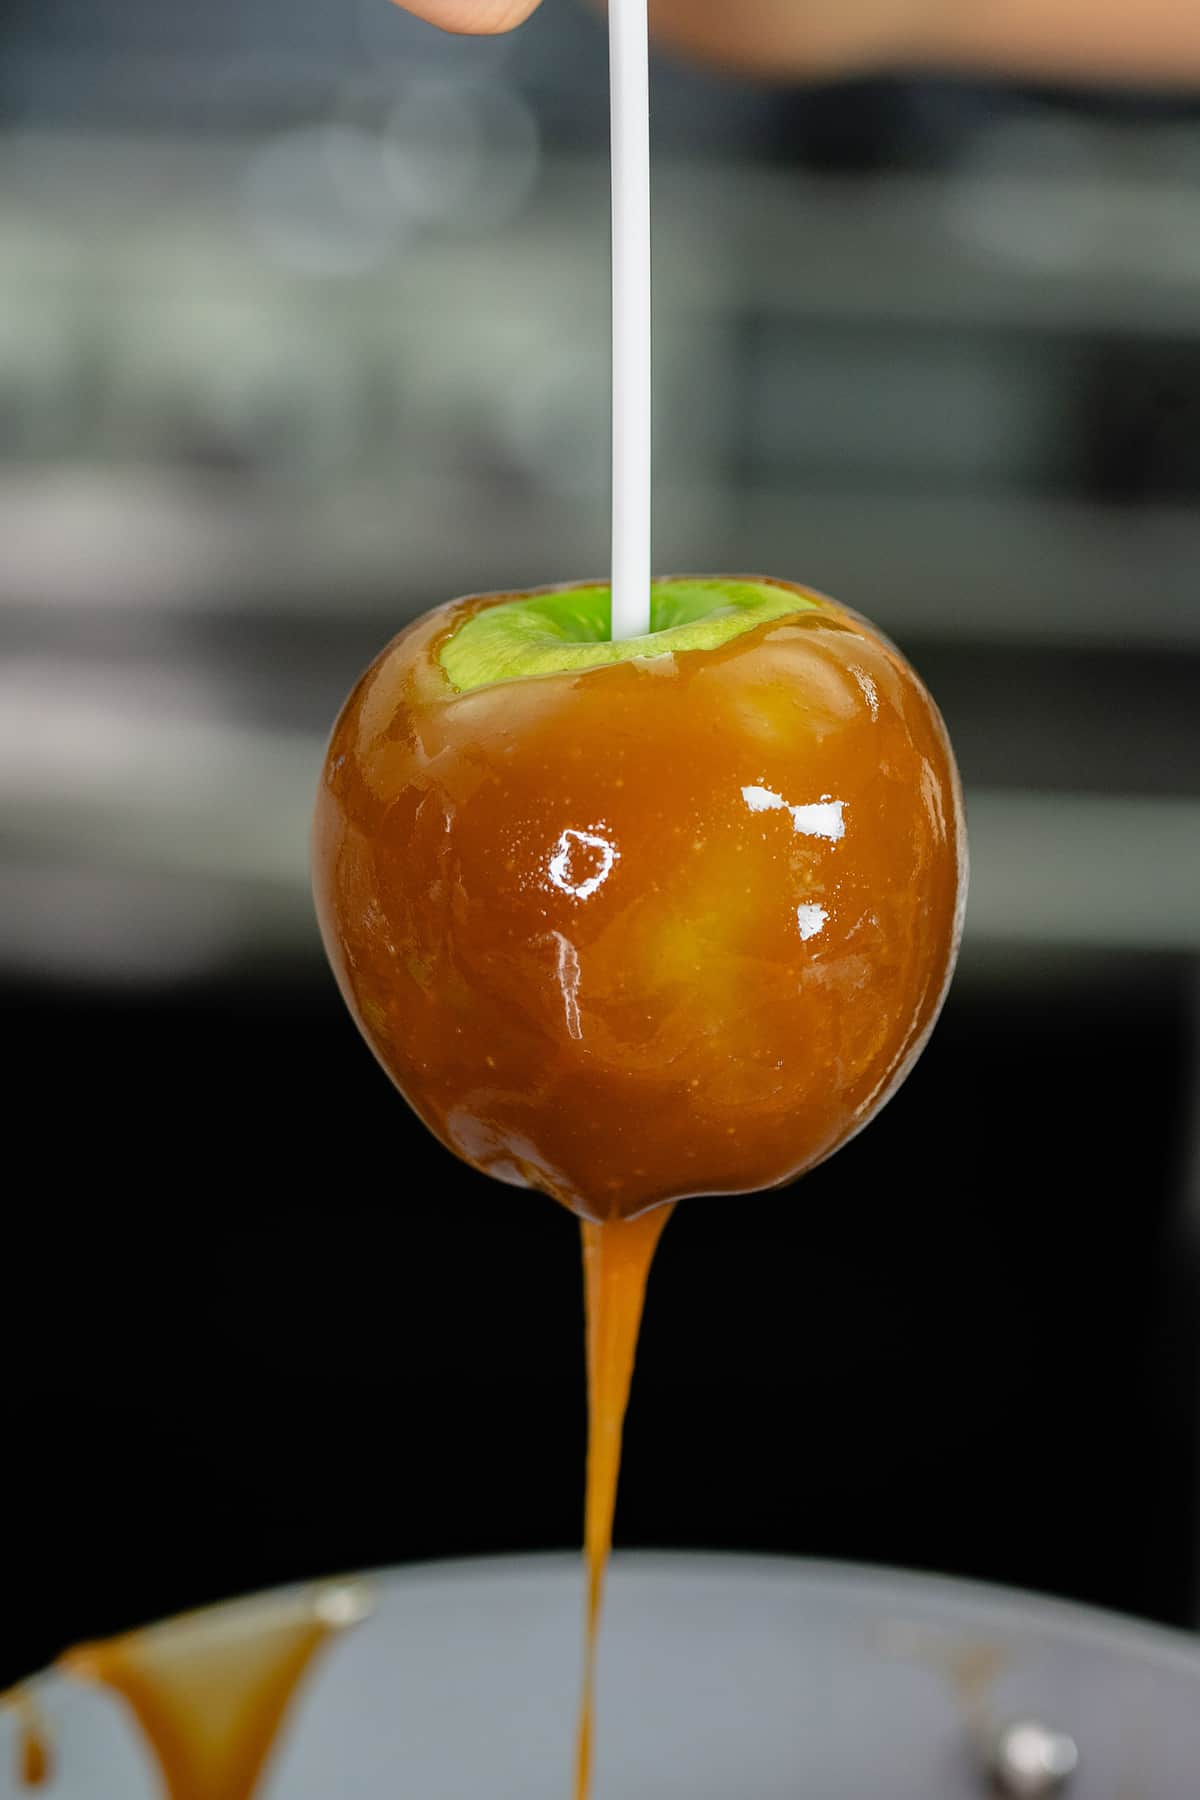 green apple dripping with fresh caramel